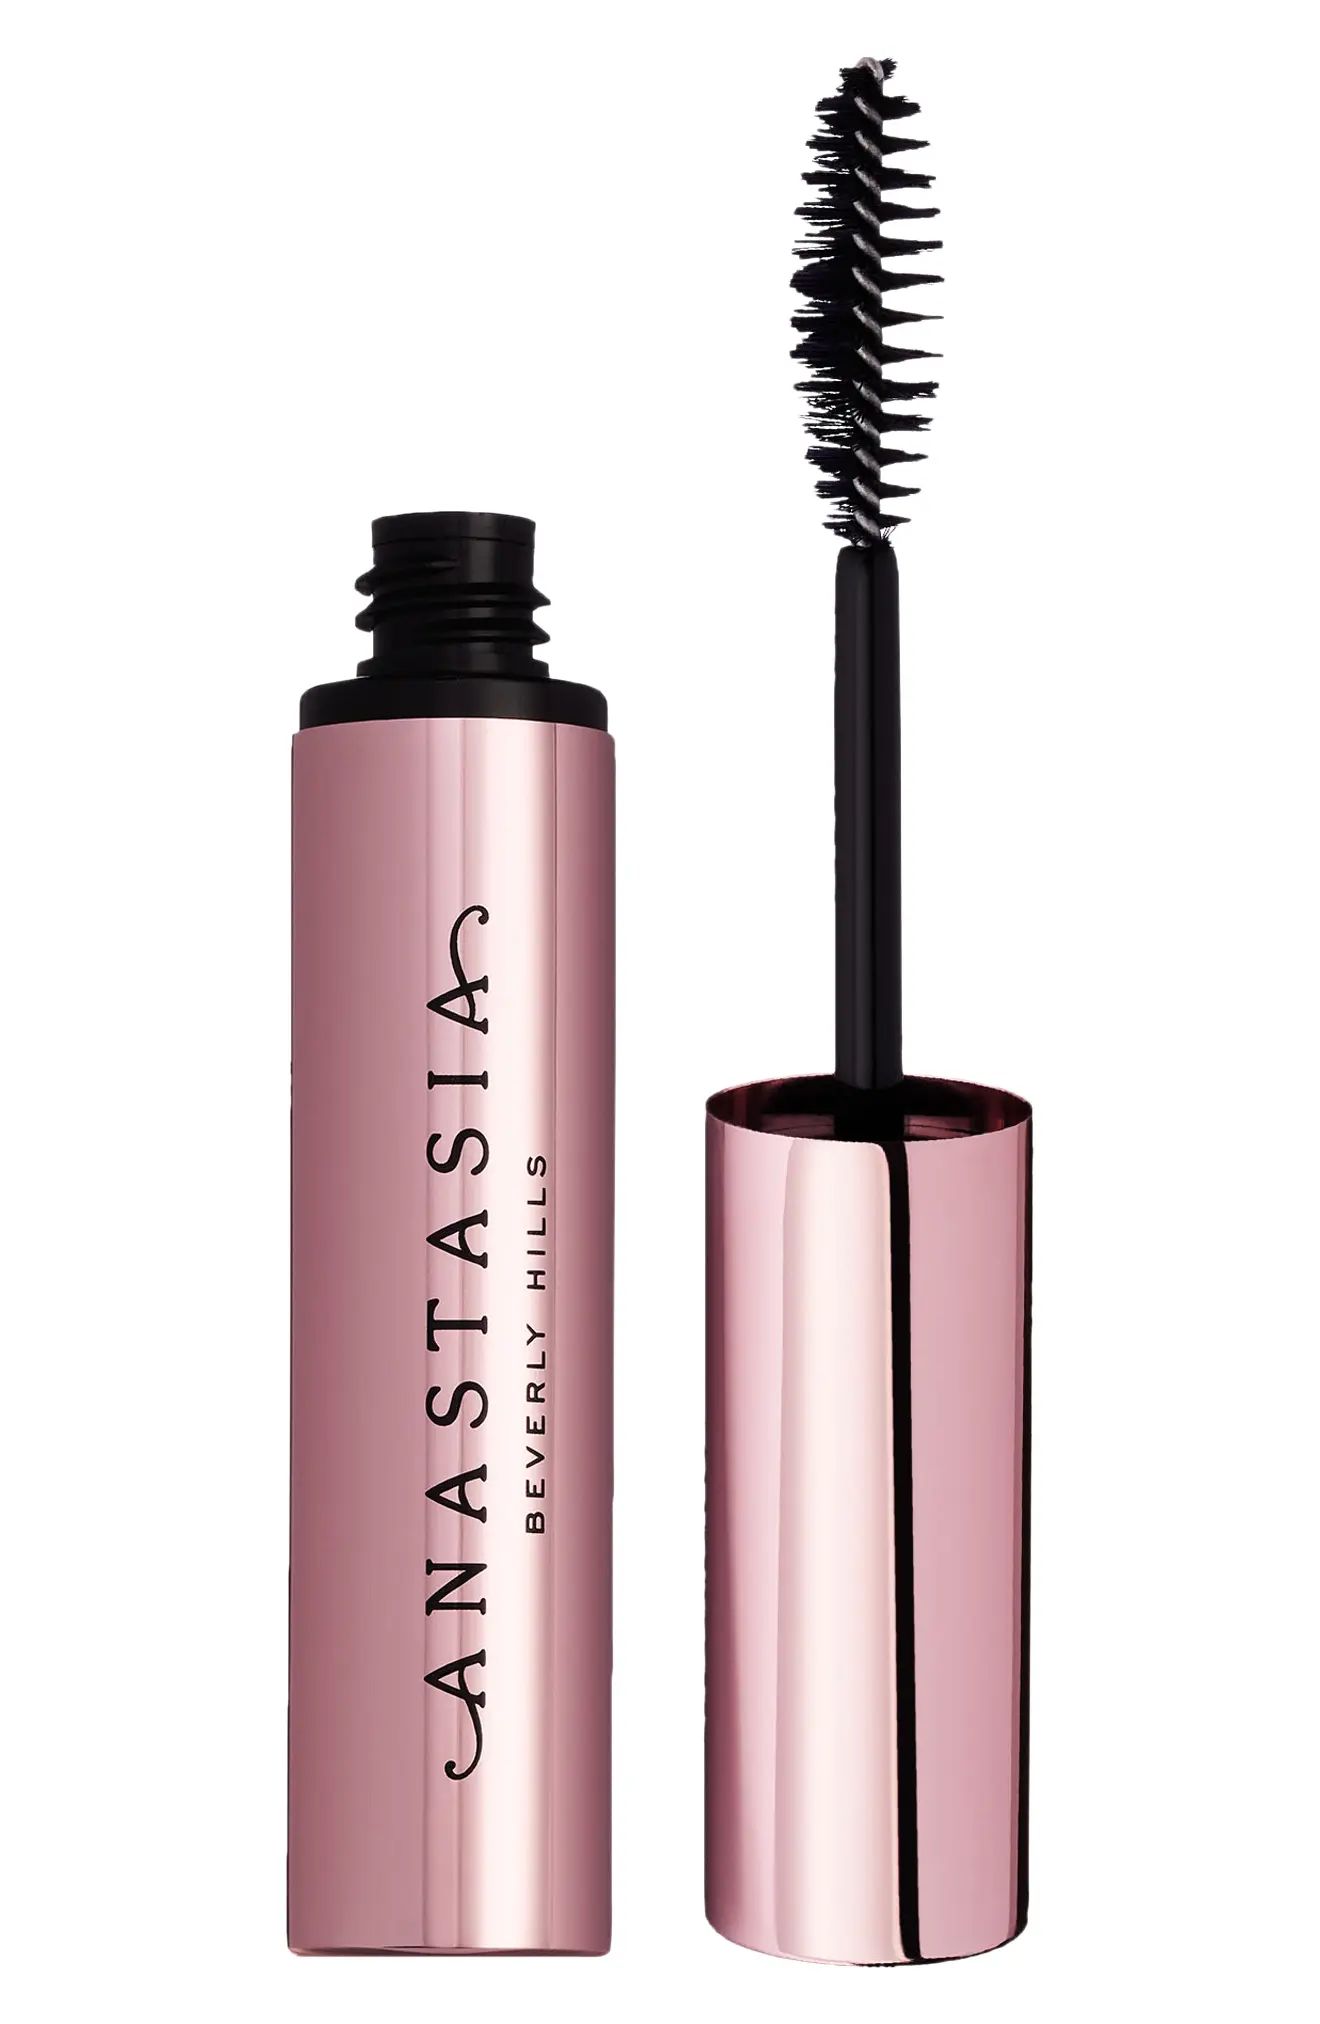 Anastasia Beverly Hills Brow Gel in Clear at Nordstrom, Size 0.26 Oz | Nordstrom